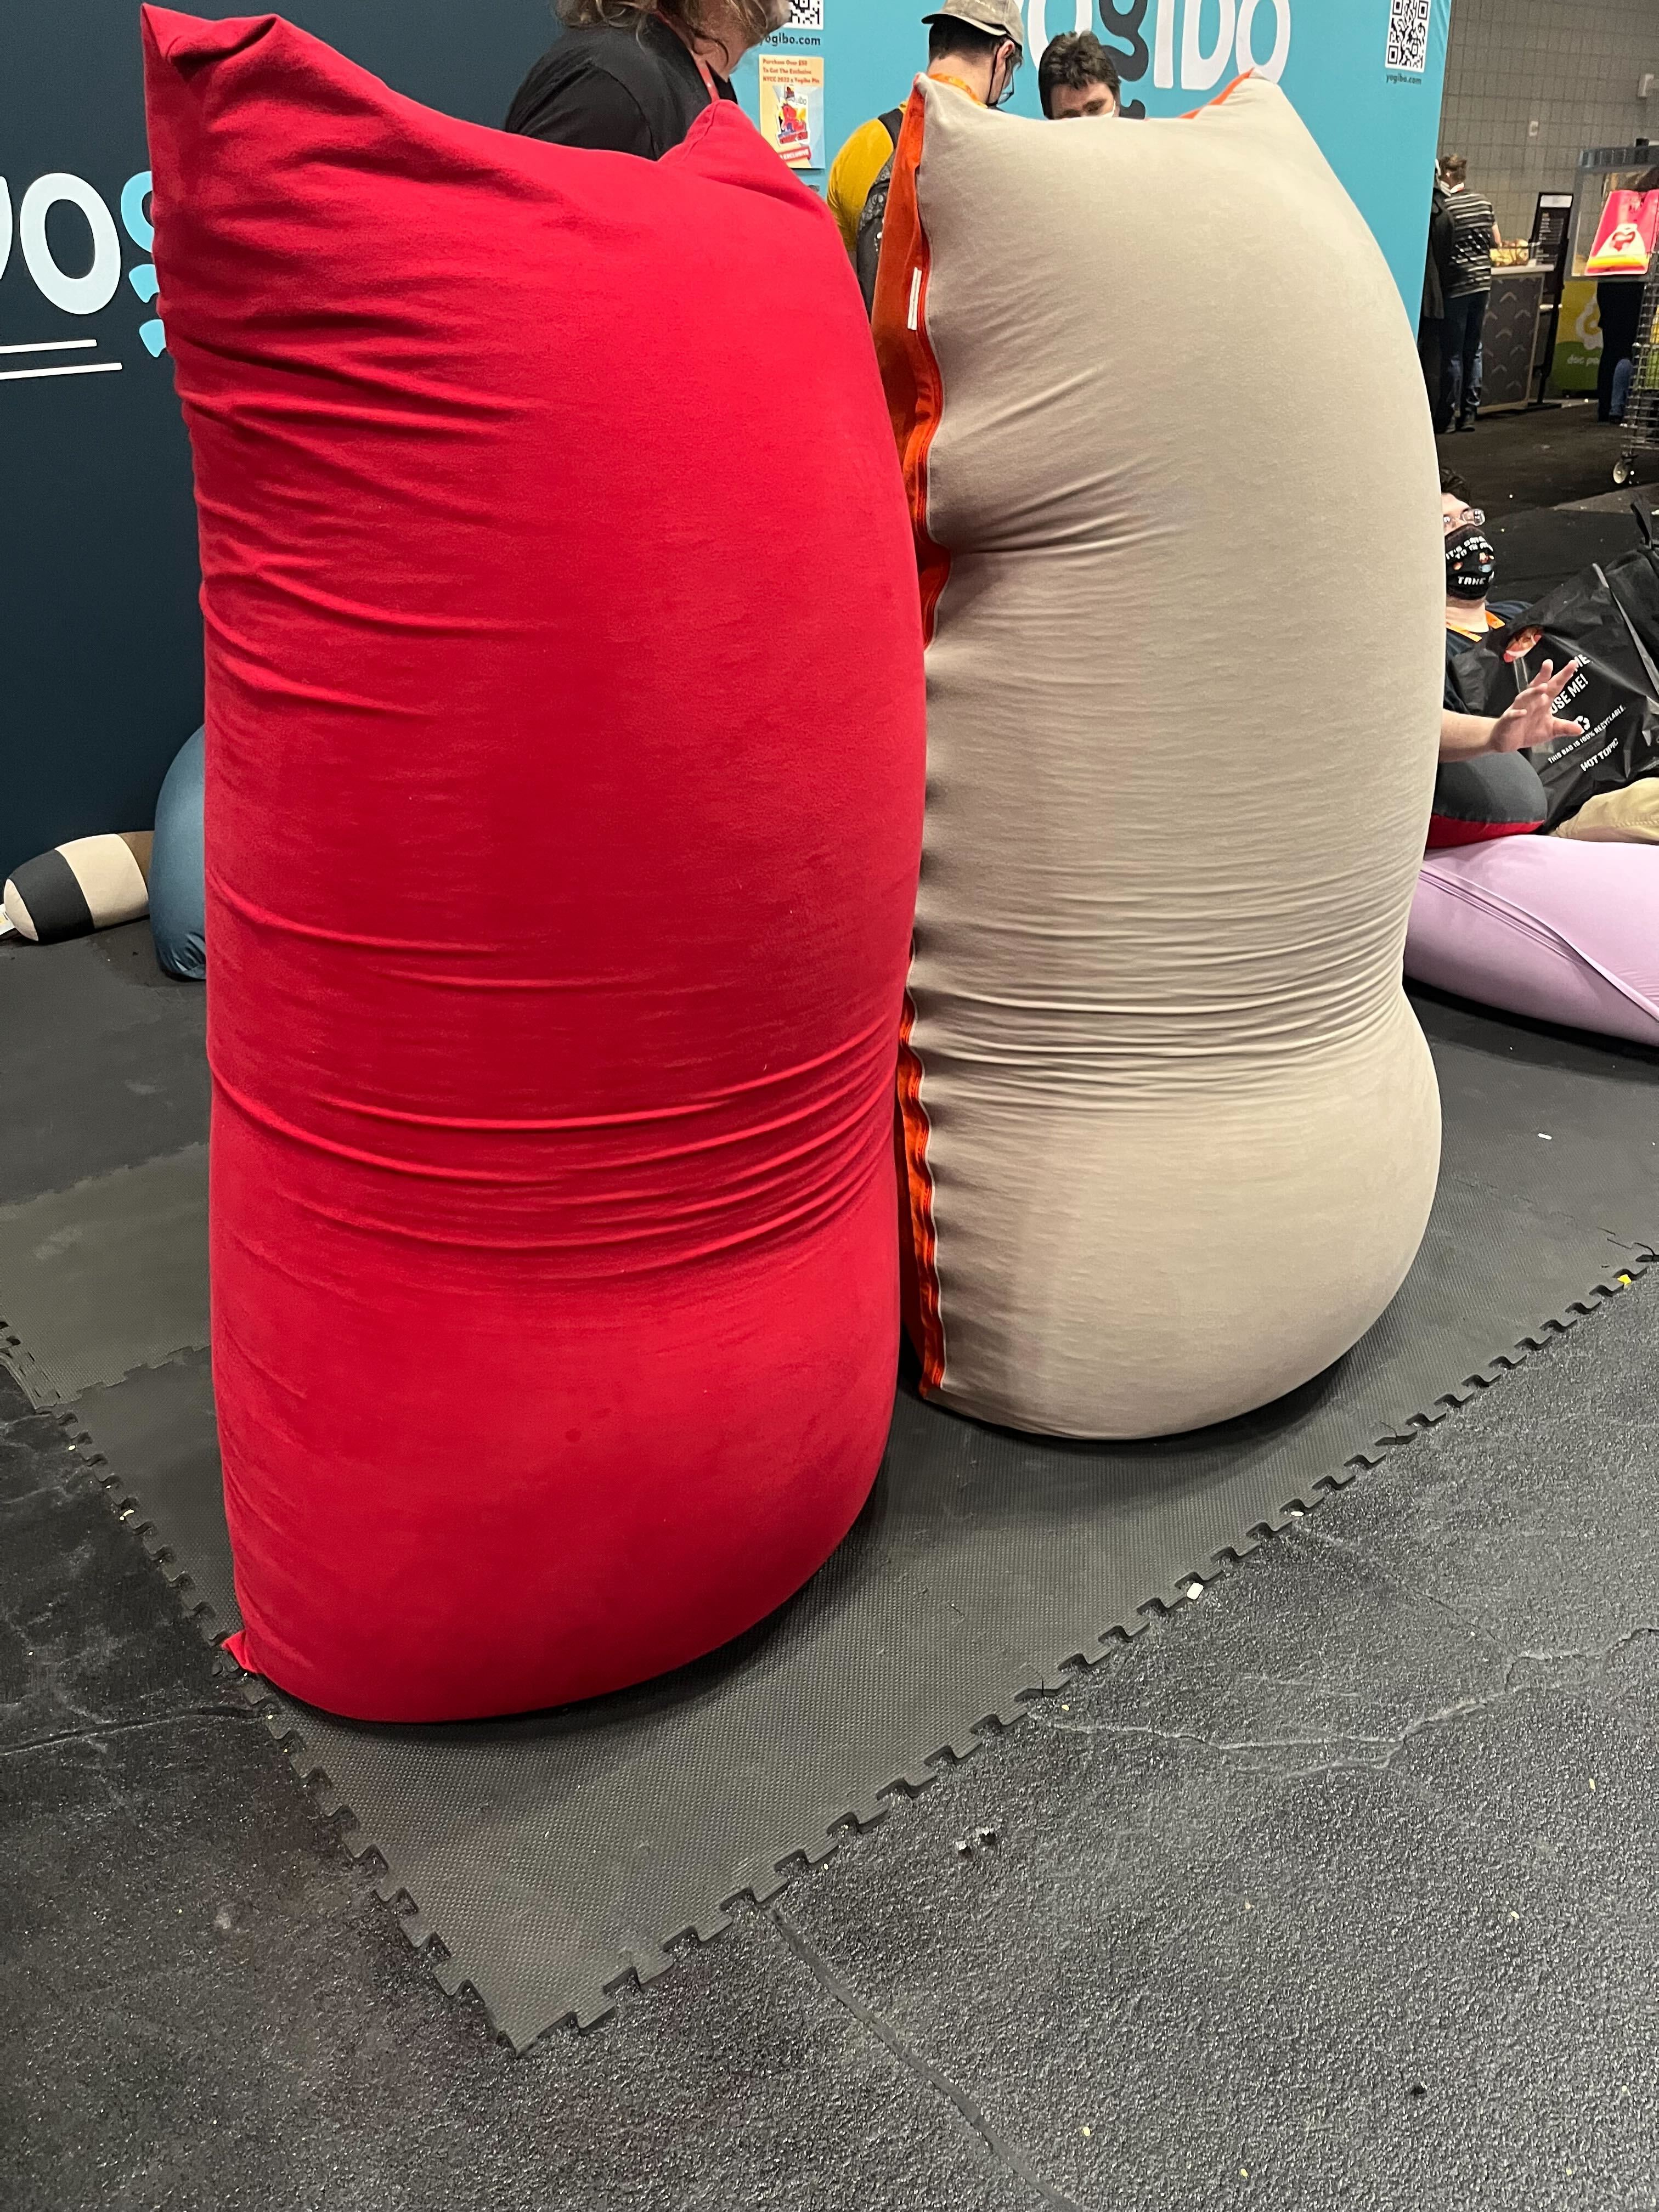 These massive and mega comfy bean bags. 